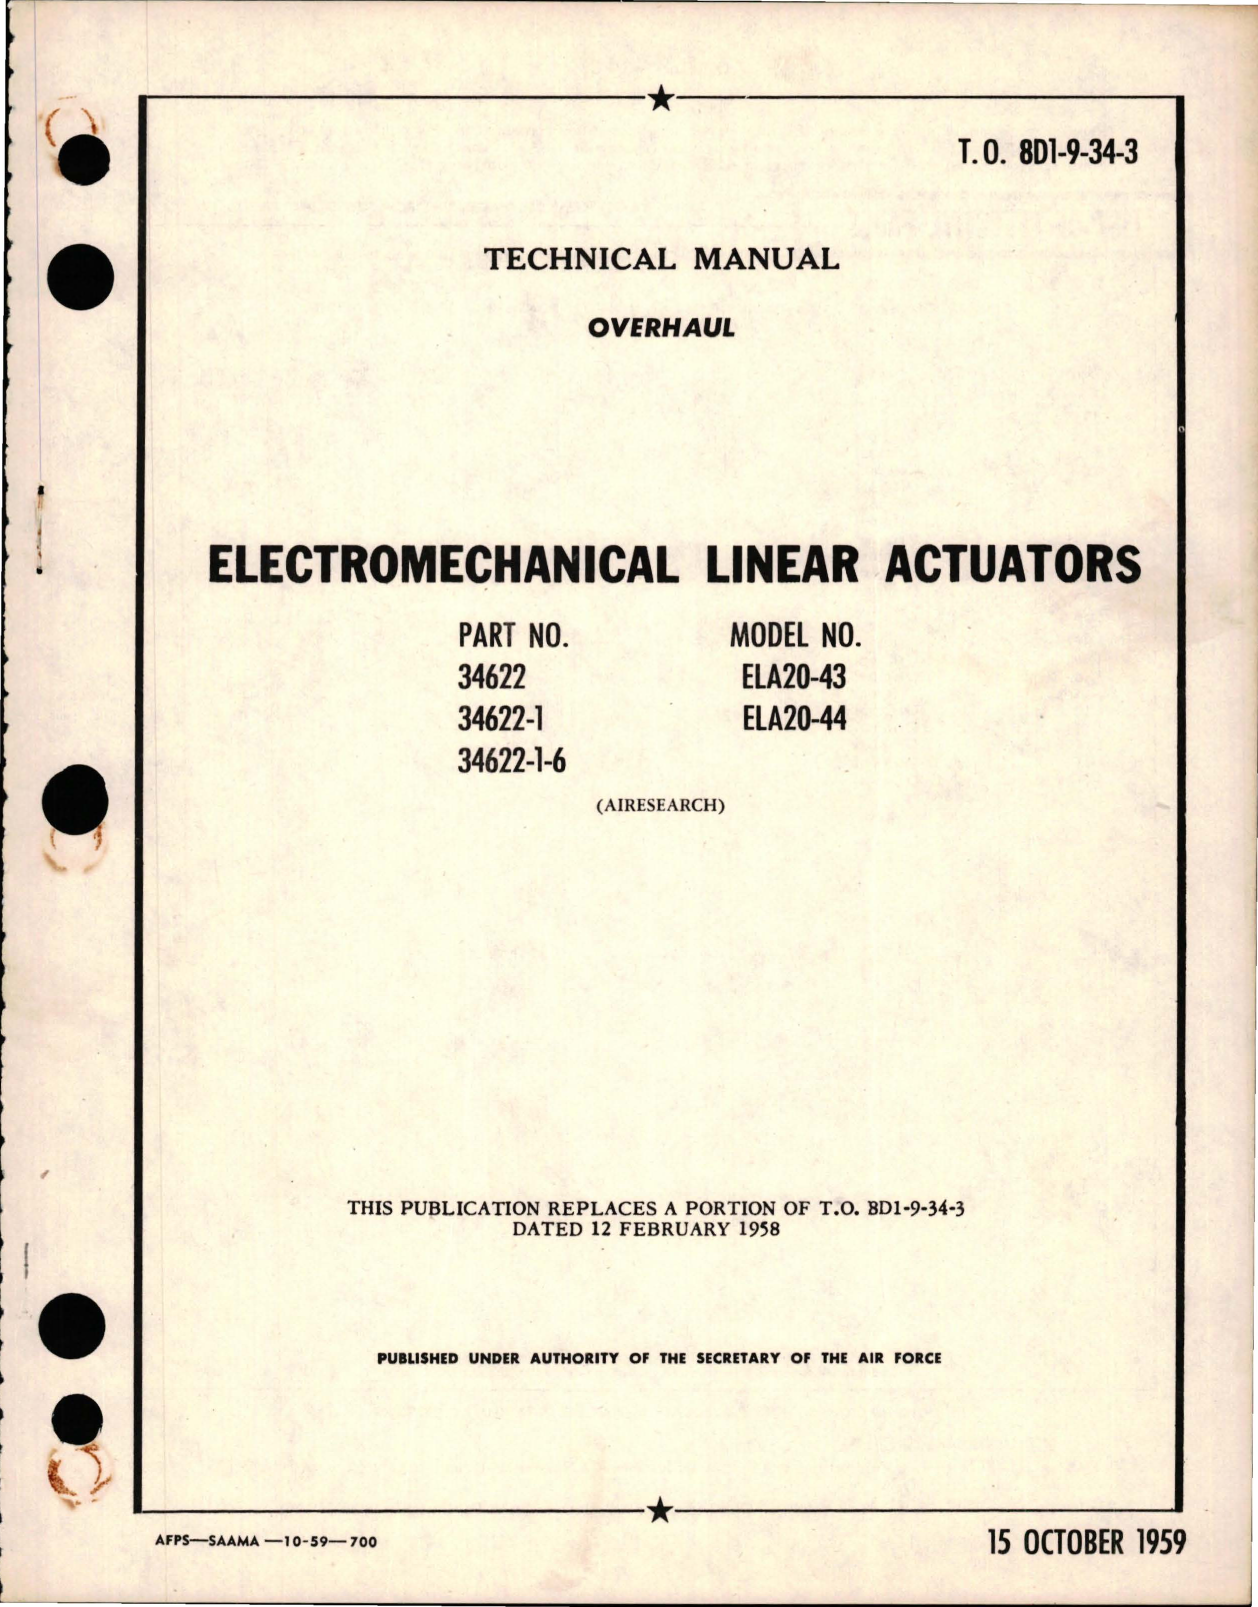 Sample page 1 from AirCorps Library document: Overhaul for Electromechanical Linear Actuators - Parts 34622, 34622-1, and 34622-1-6 - Models ELA20-43, -44